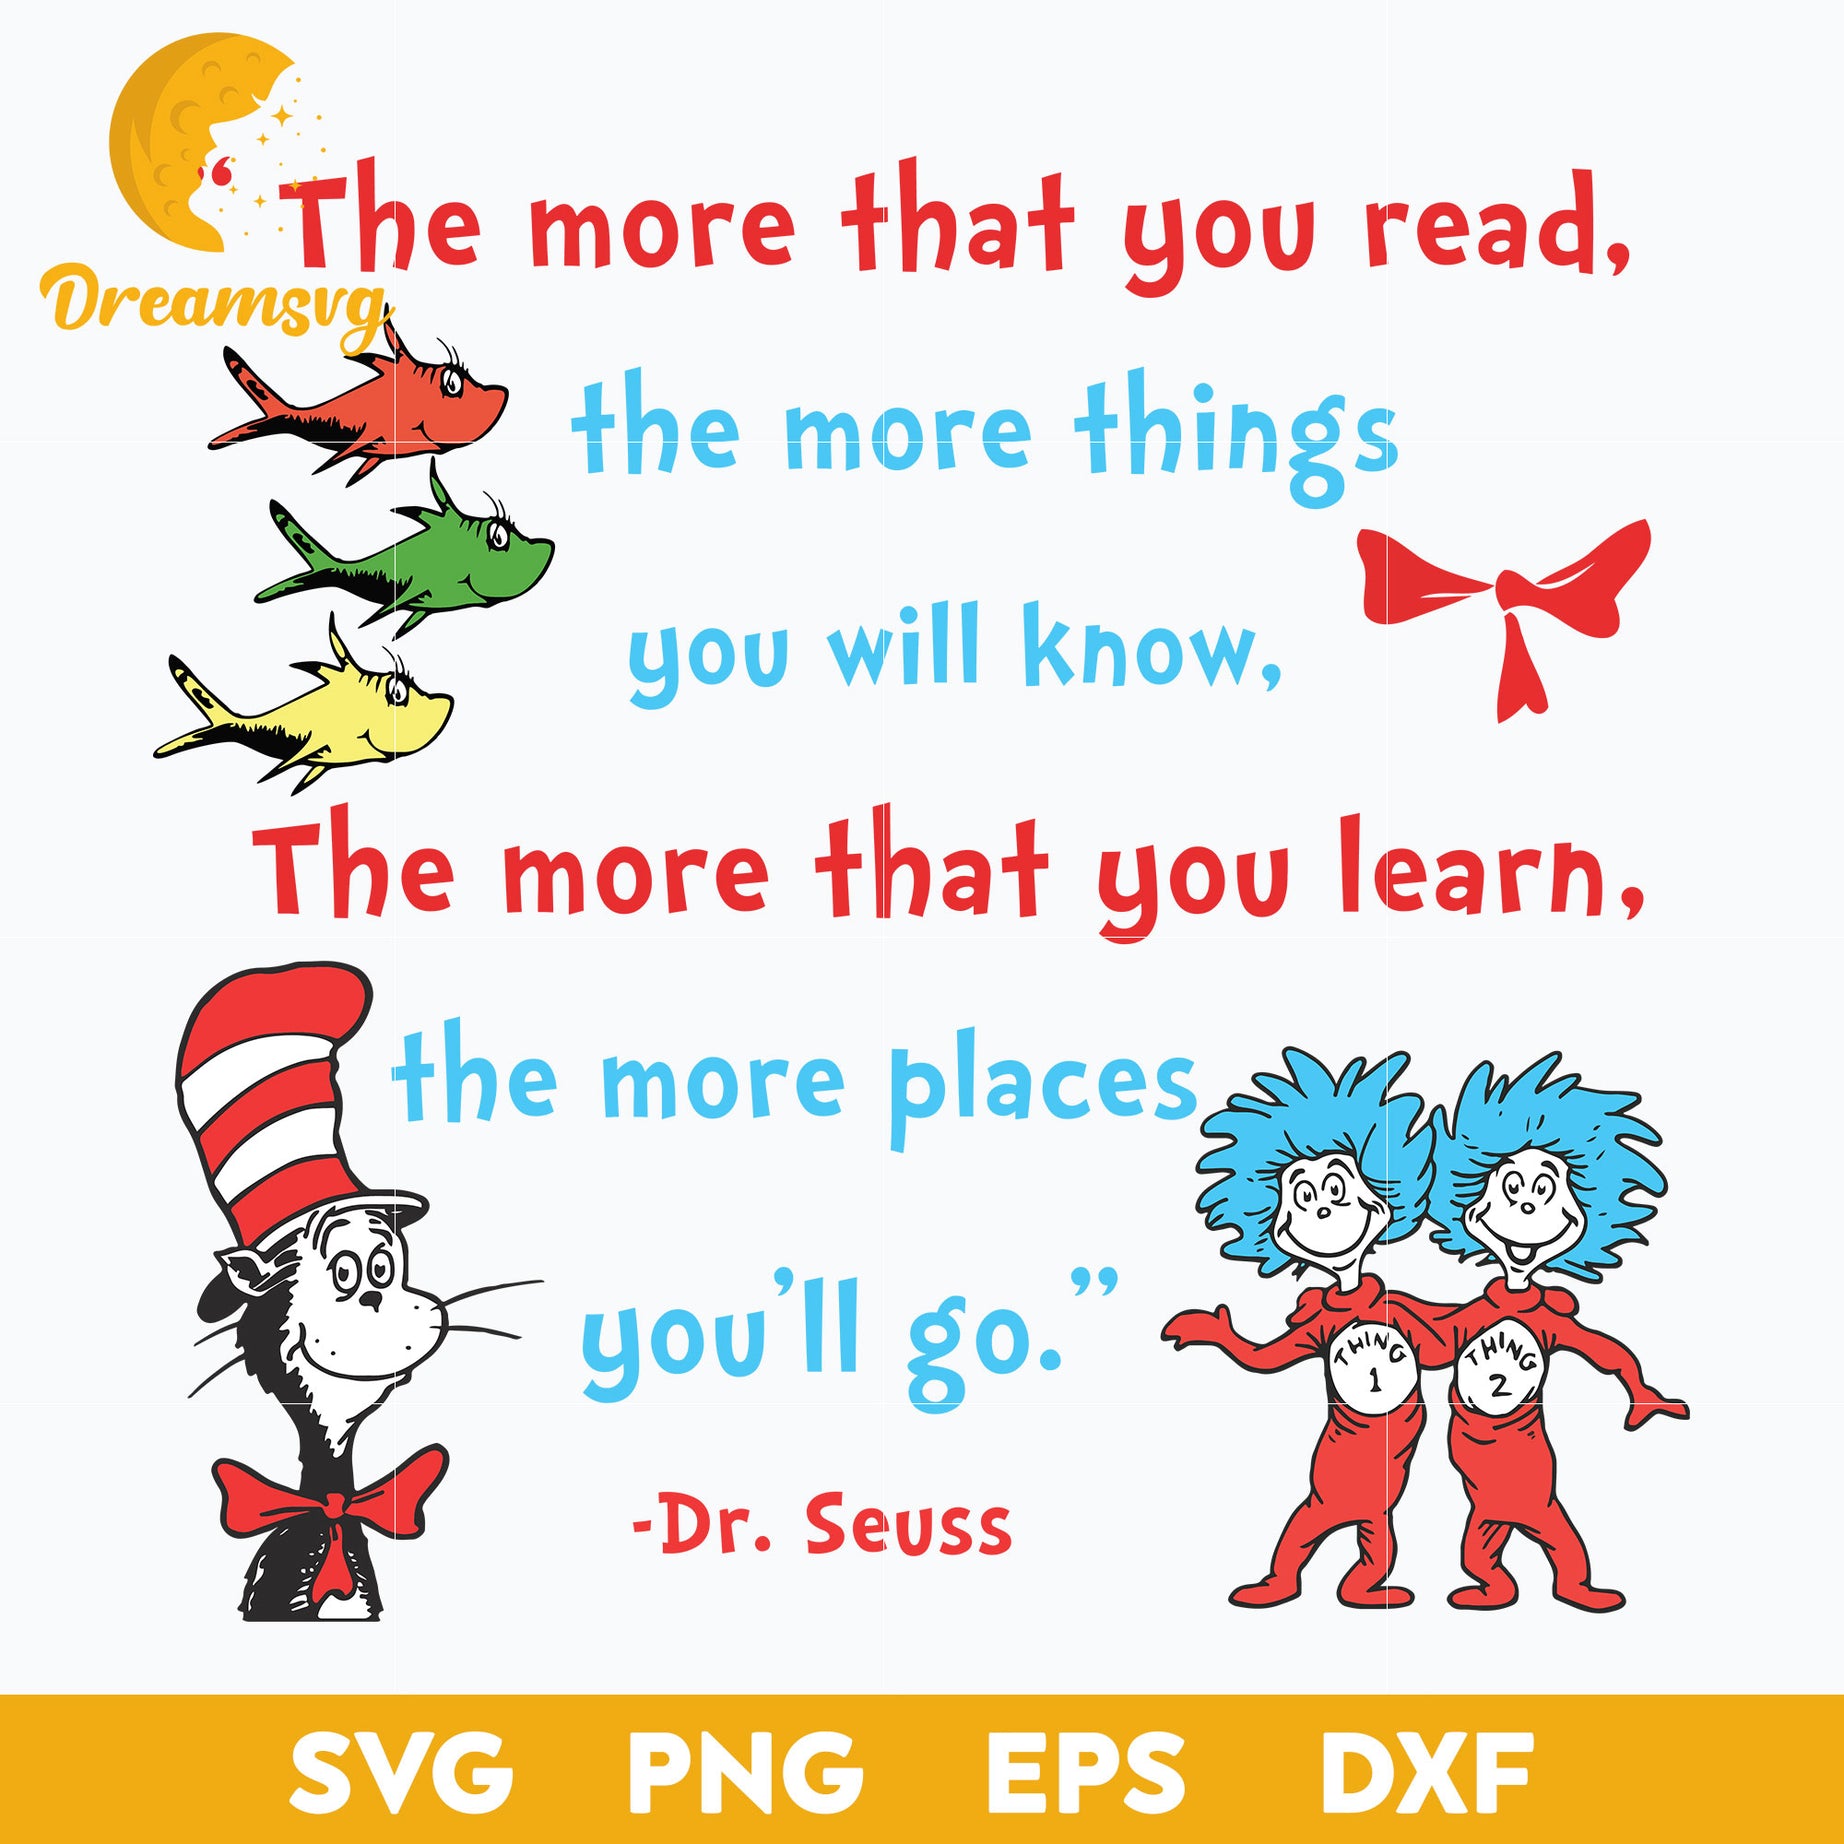 The More That You Read The More Things You Will Know SVG, Dr Seuss SVG